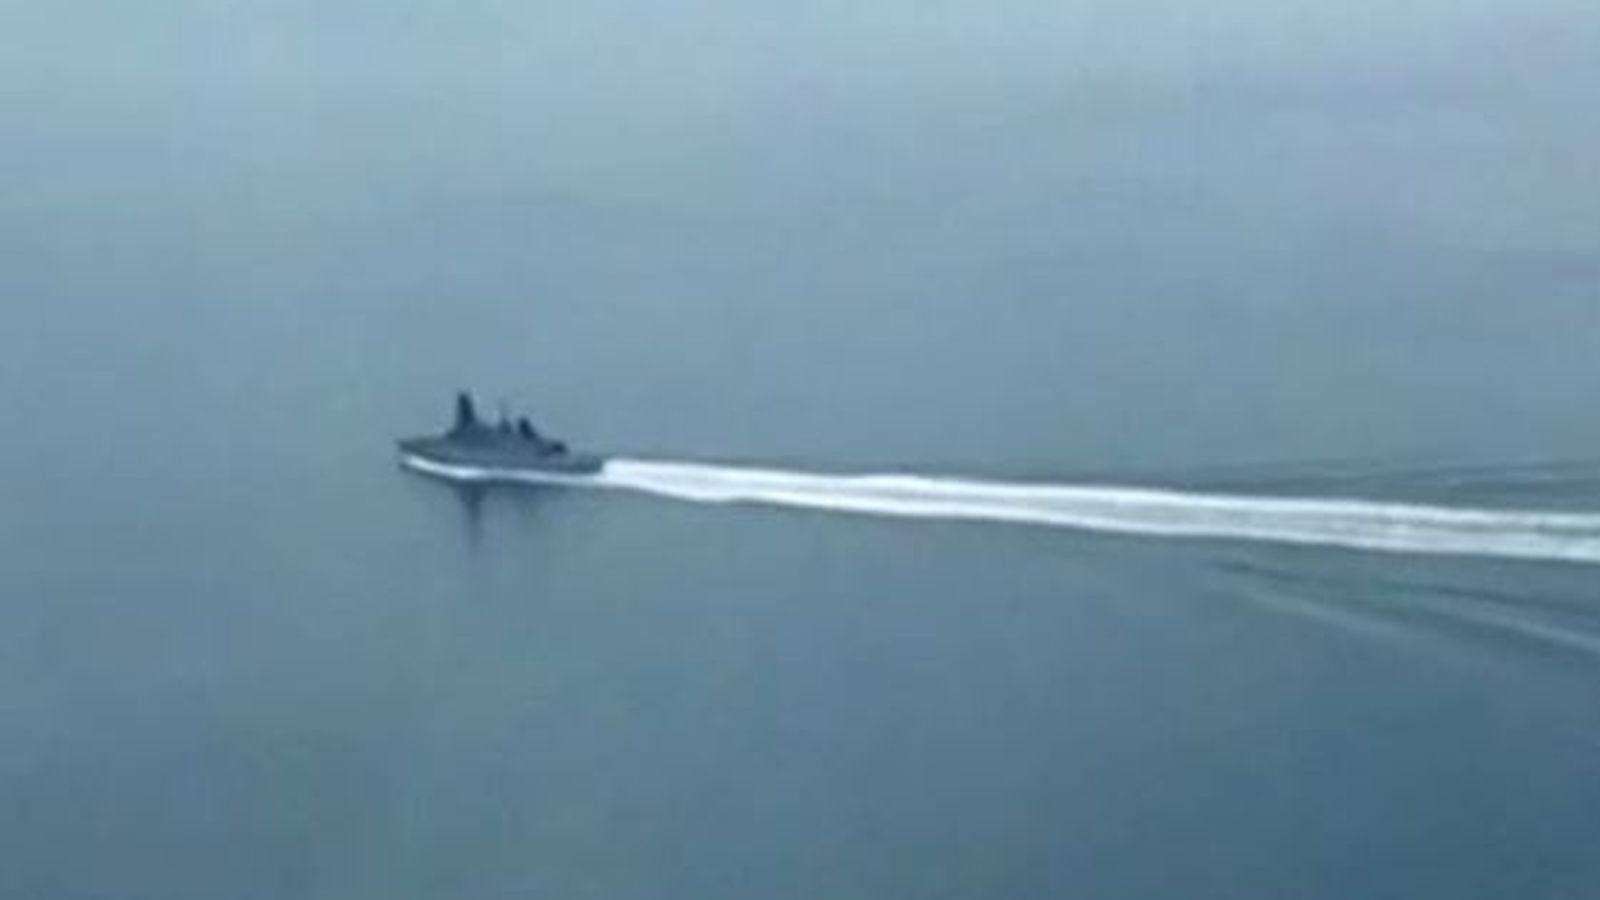 HMS Defender: Moscow releases footage it says shows Navy vessel being 'chased out' by Russian military